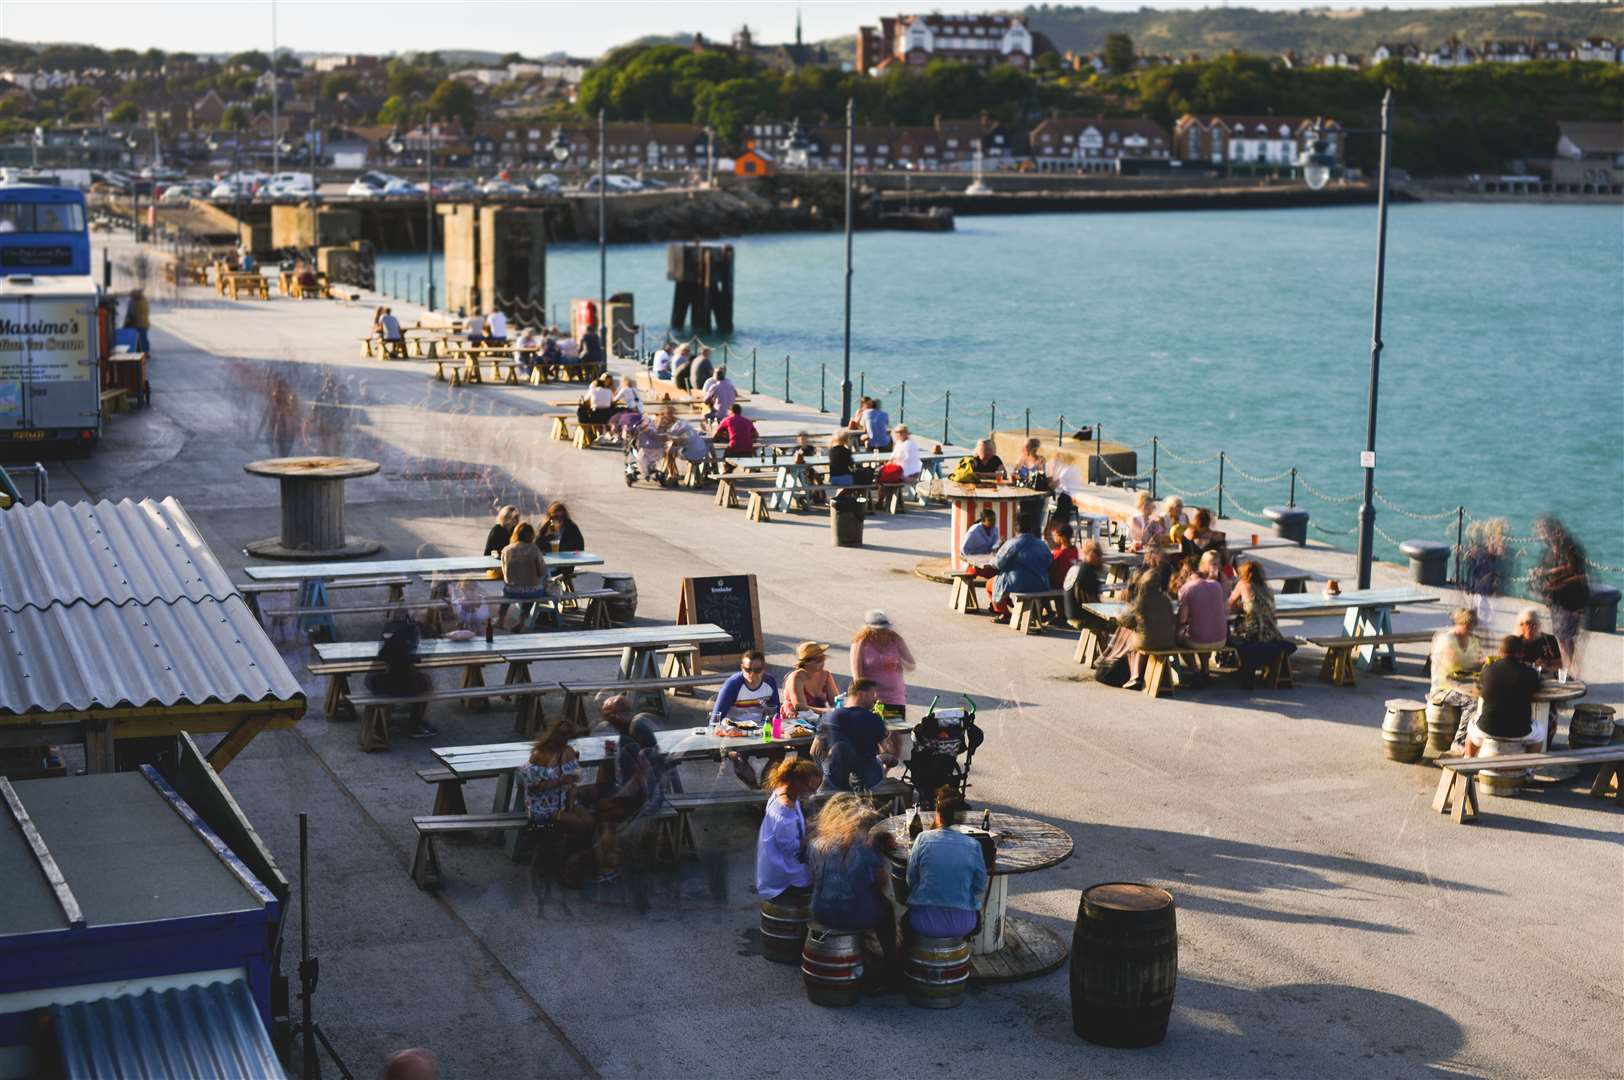 Folkestone Harbour Arm has developed into a thriving destination for food and drink. Picture: Folkestone Harbour Arm